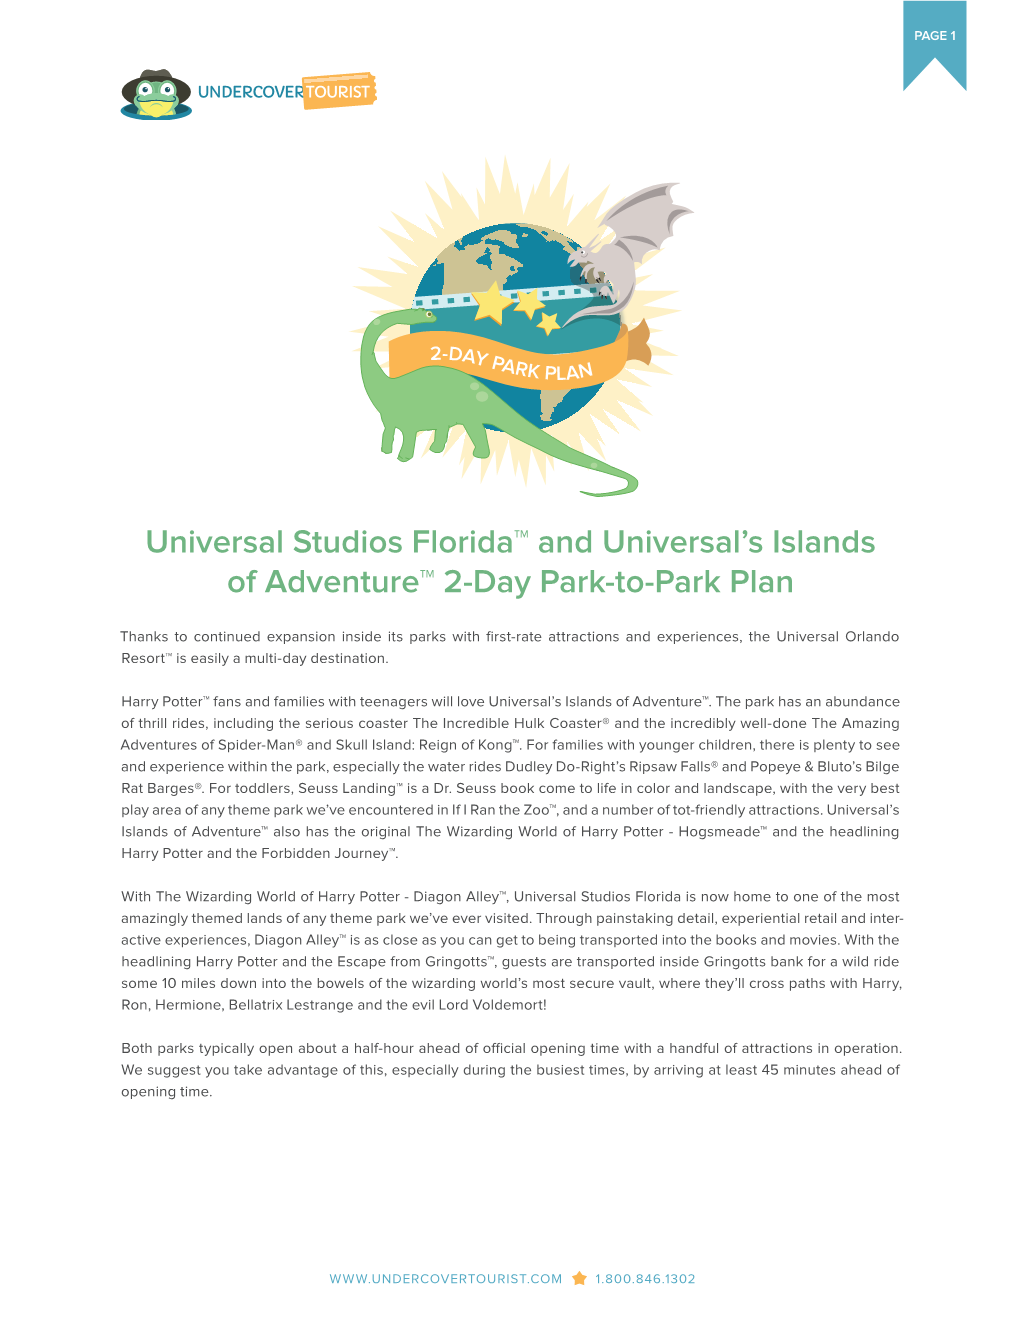 Universal Studios Florida™ and Universal's Islands of Adventure™ 2-Day Park-To-Park Plan